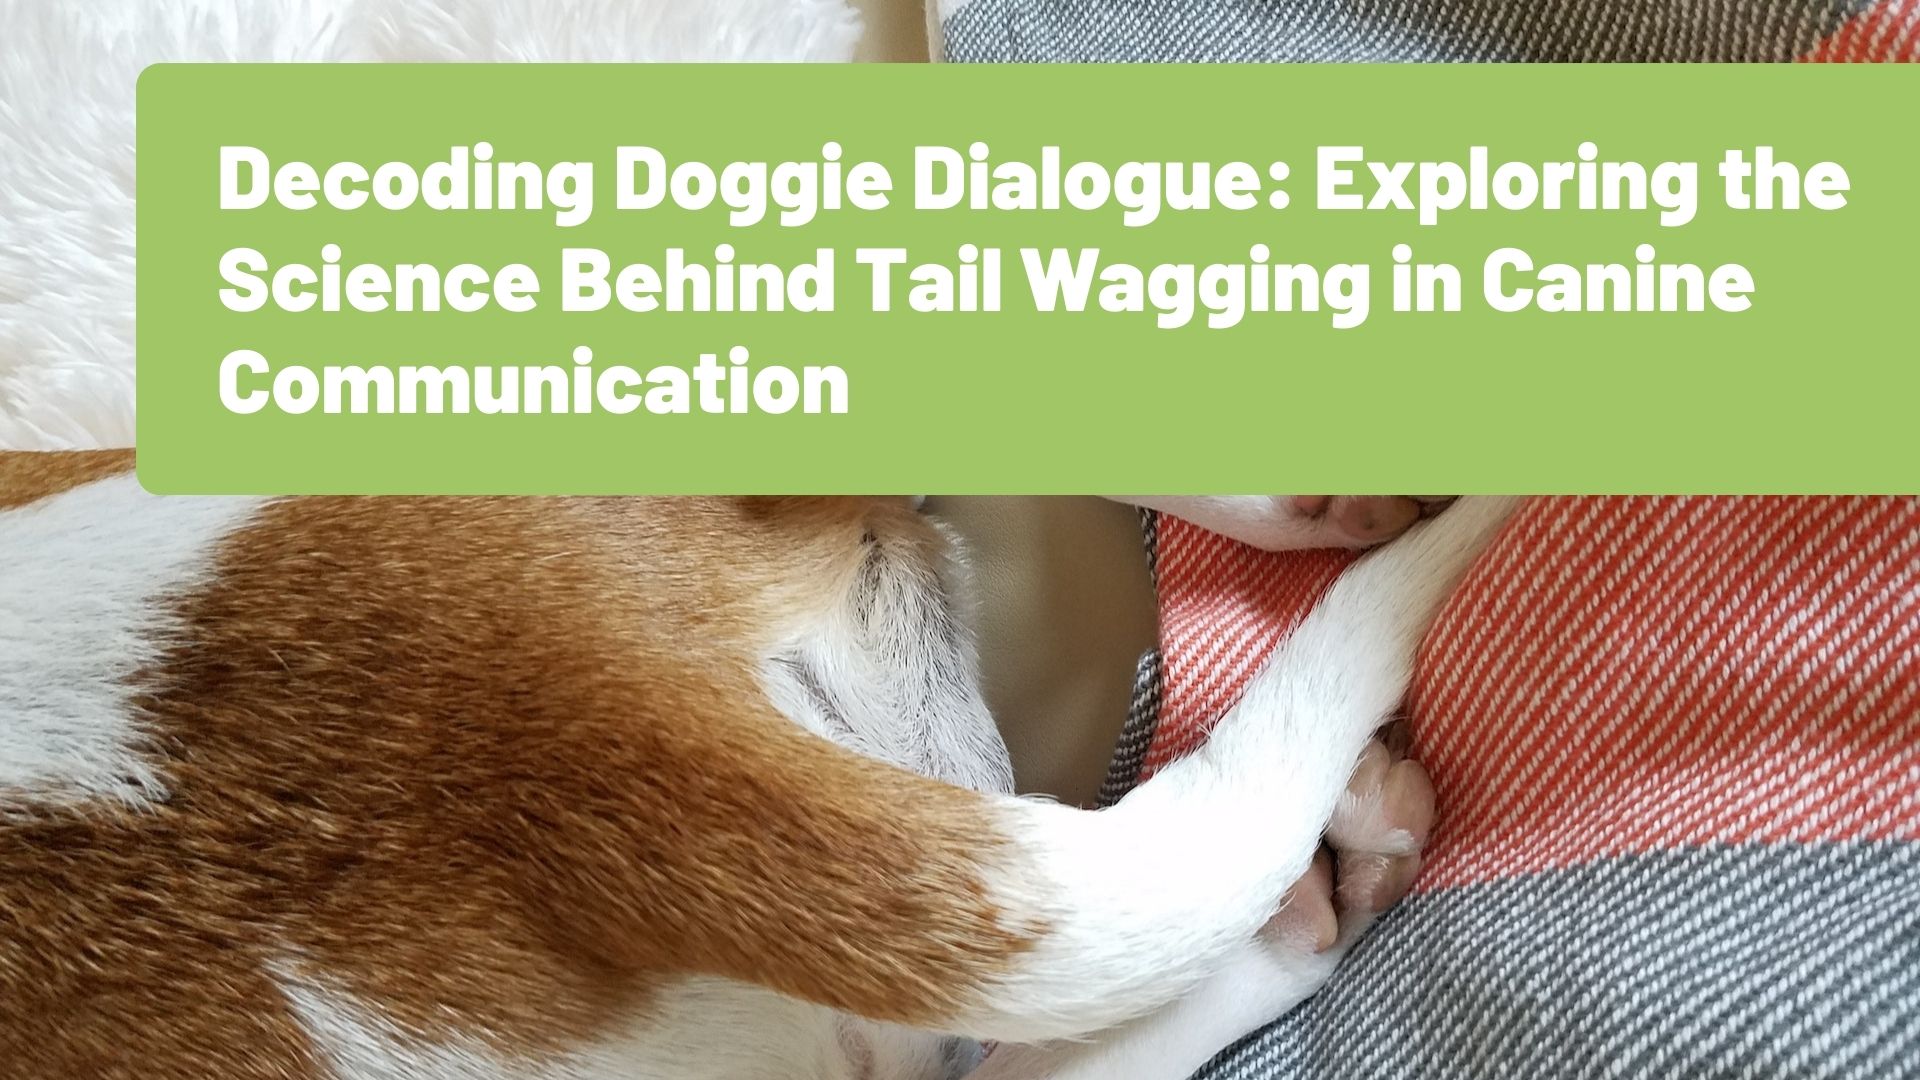 Decoding Doggie Dialogue: Exploring the Science Behind Tail Wagging in Canine Communication